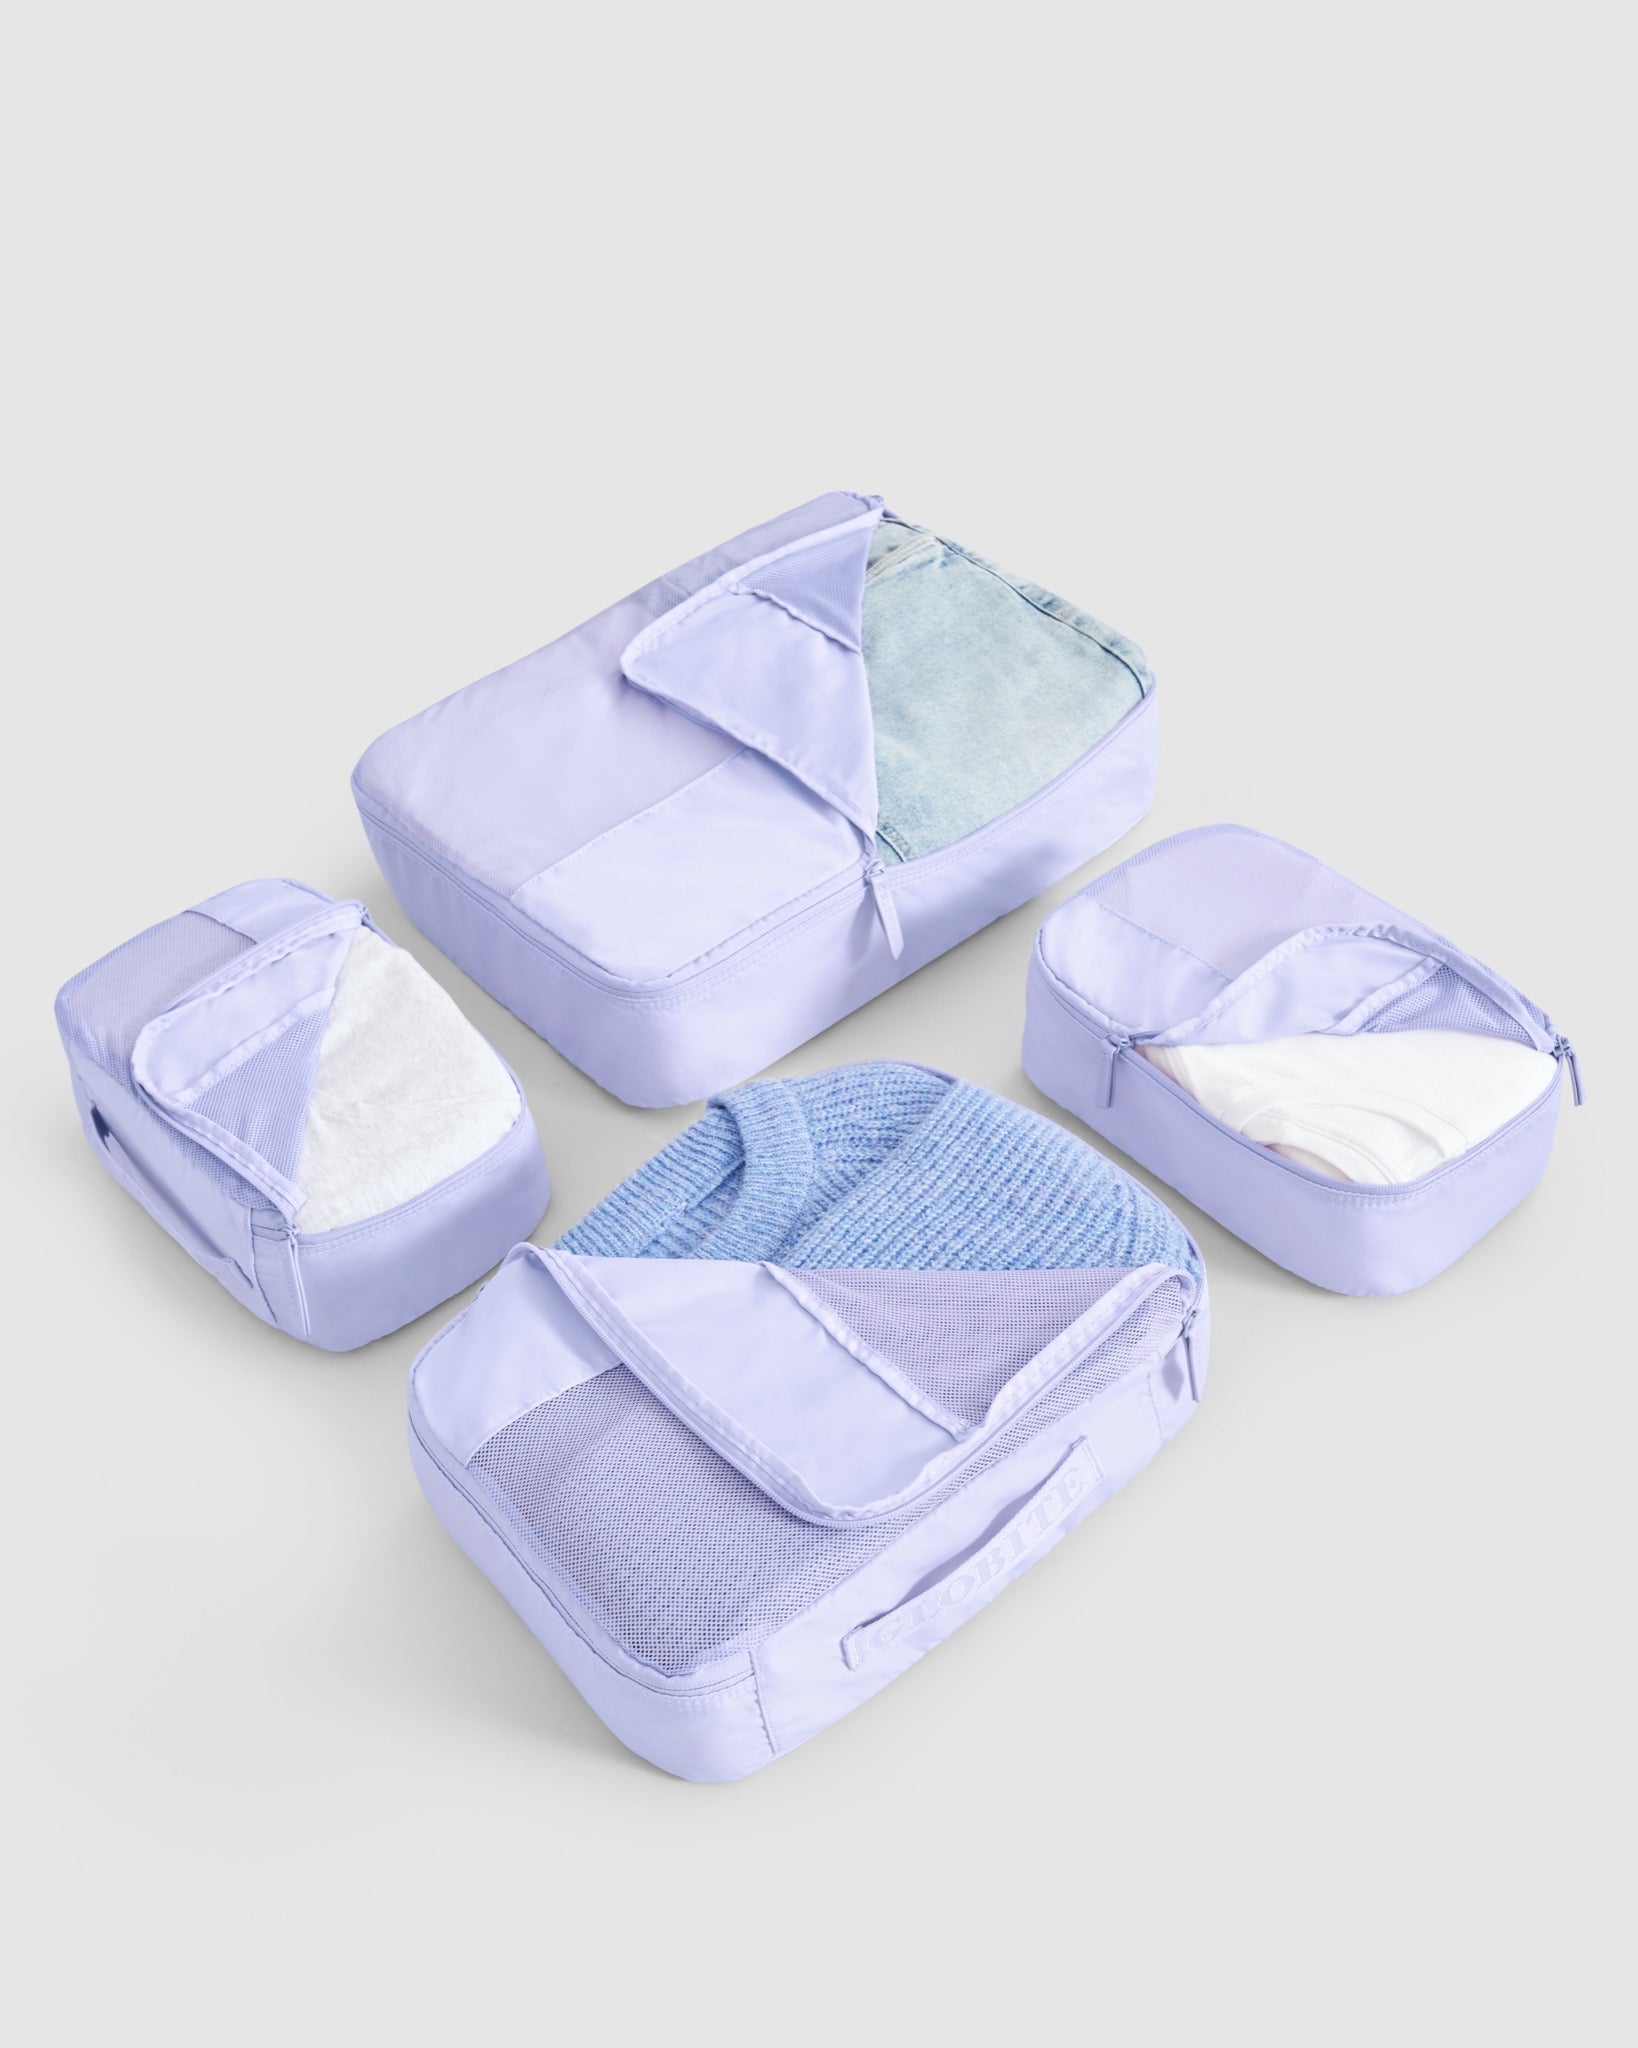 4 Piece Packing Cube in Lavender